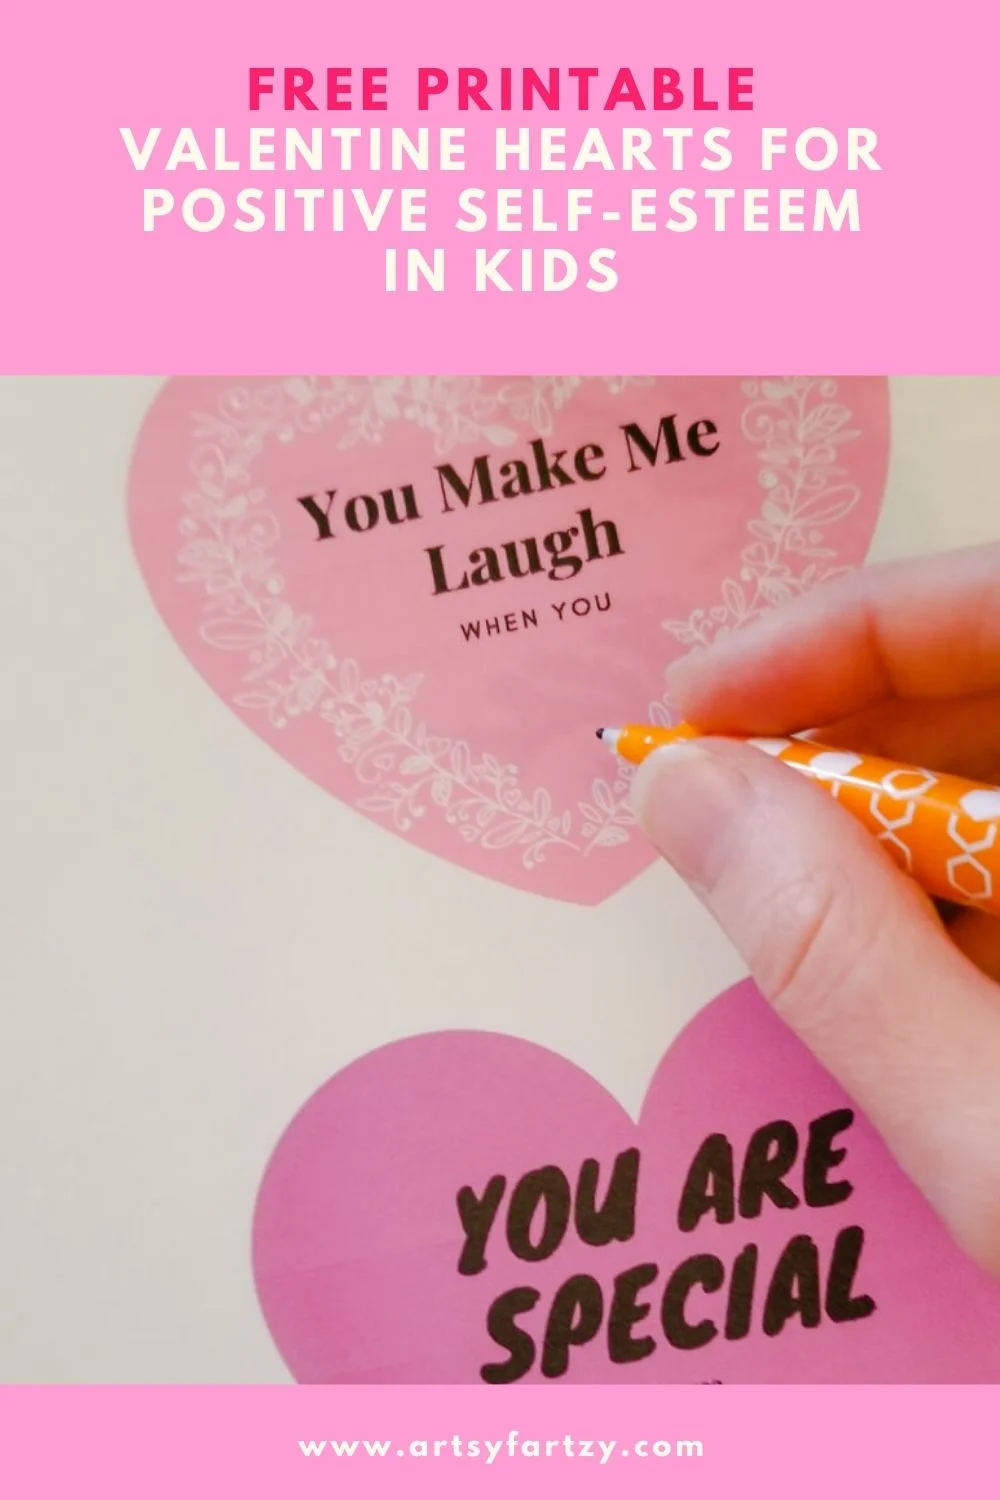 Free printable Valentine's Day hearts for positive self-esteem in kids to use for the first 14 days of February